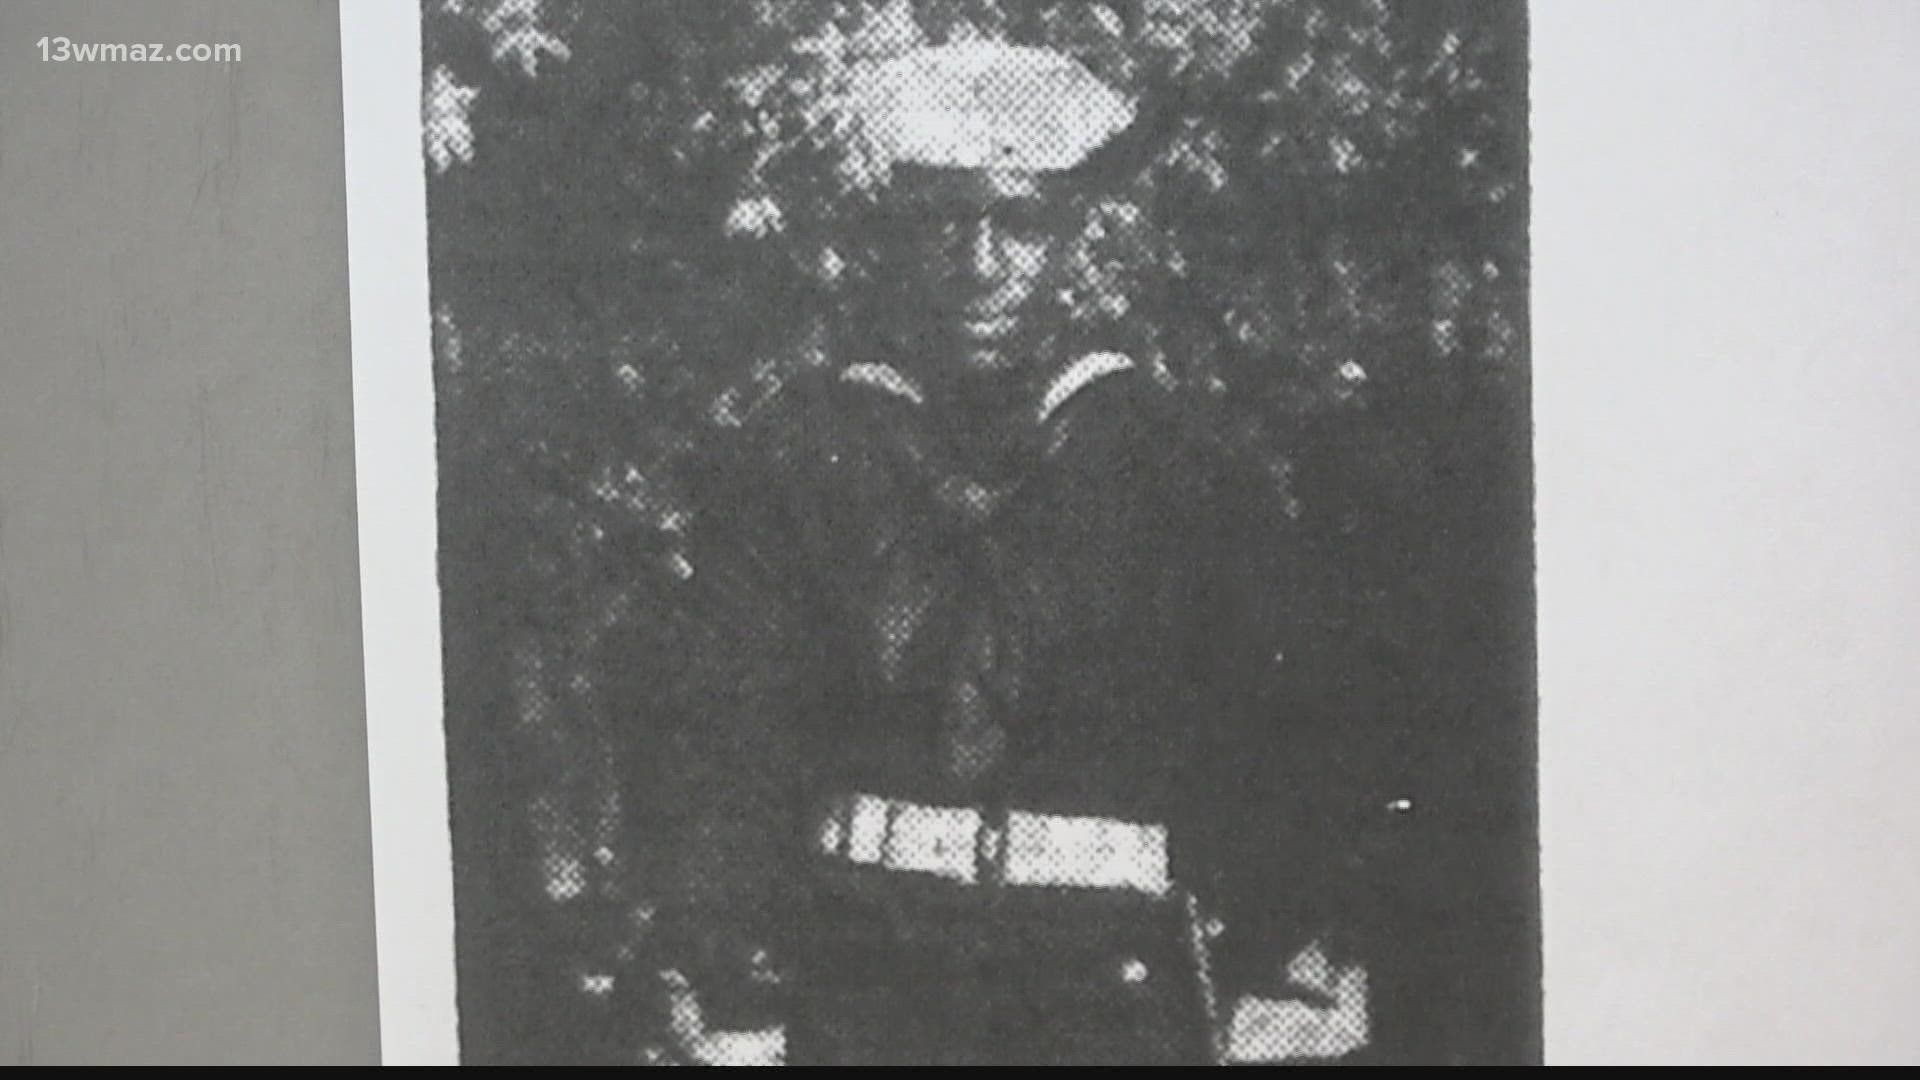 George Vining was a native of Macon and a member of the U.S. Navy. He died during the attack on Pearl Harbor.